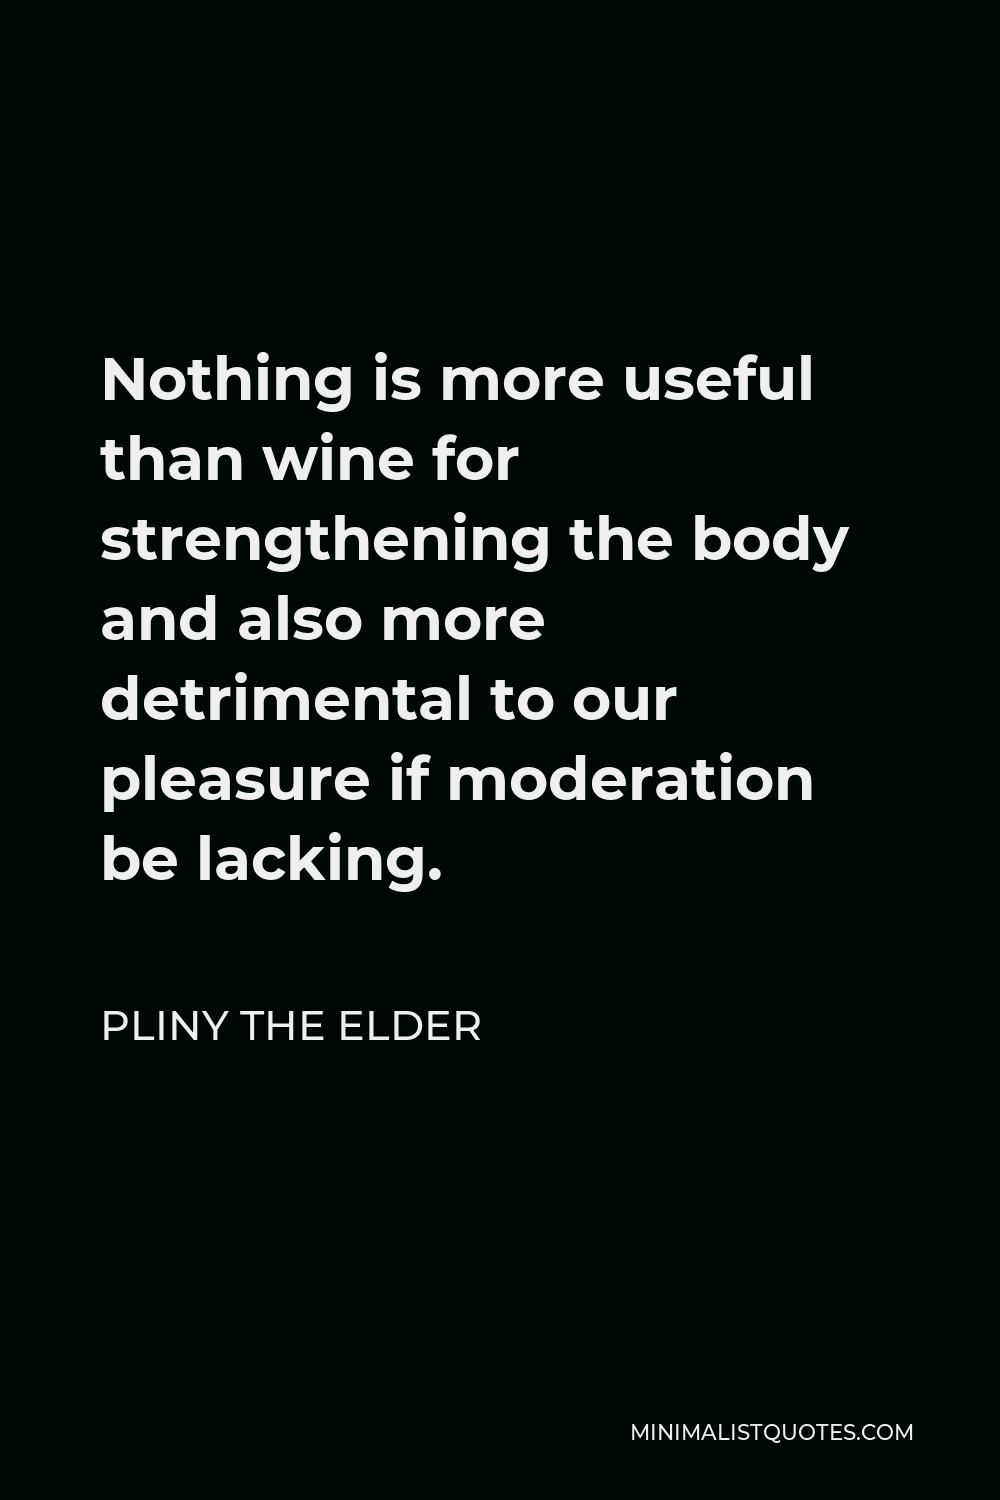 Pliny the Elder Quote - Nothing is more useful than wine for strengthening the body and also more detrimental to our pleasure if moderation be lacking.